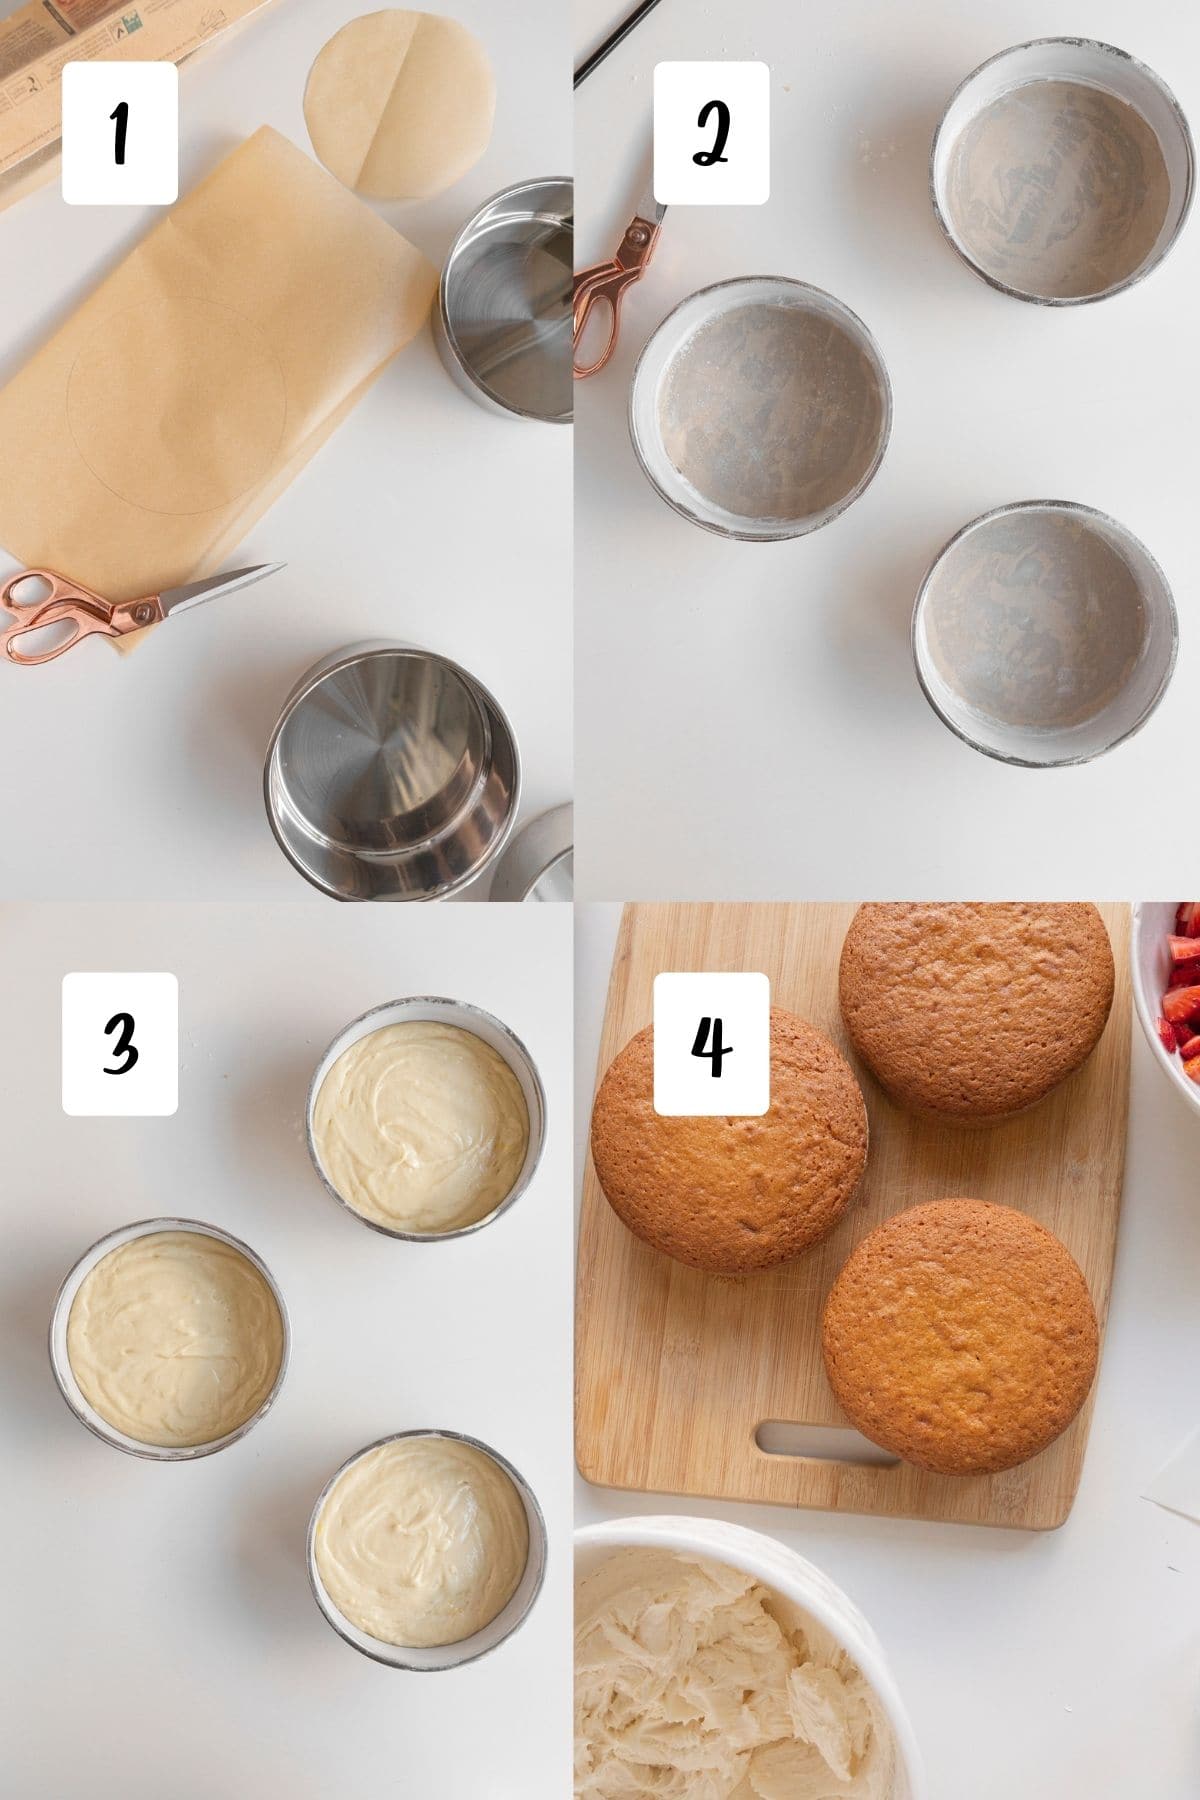 steps for preparing and baking cake layers